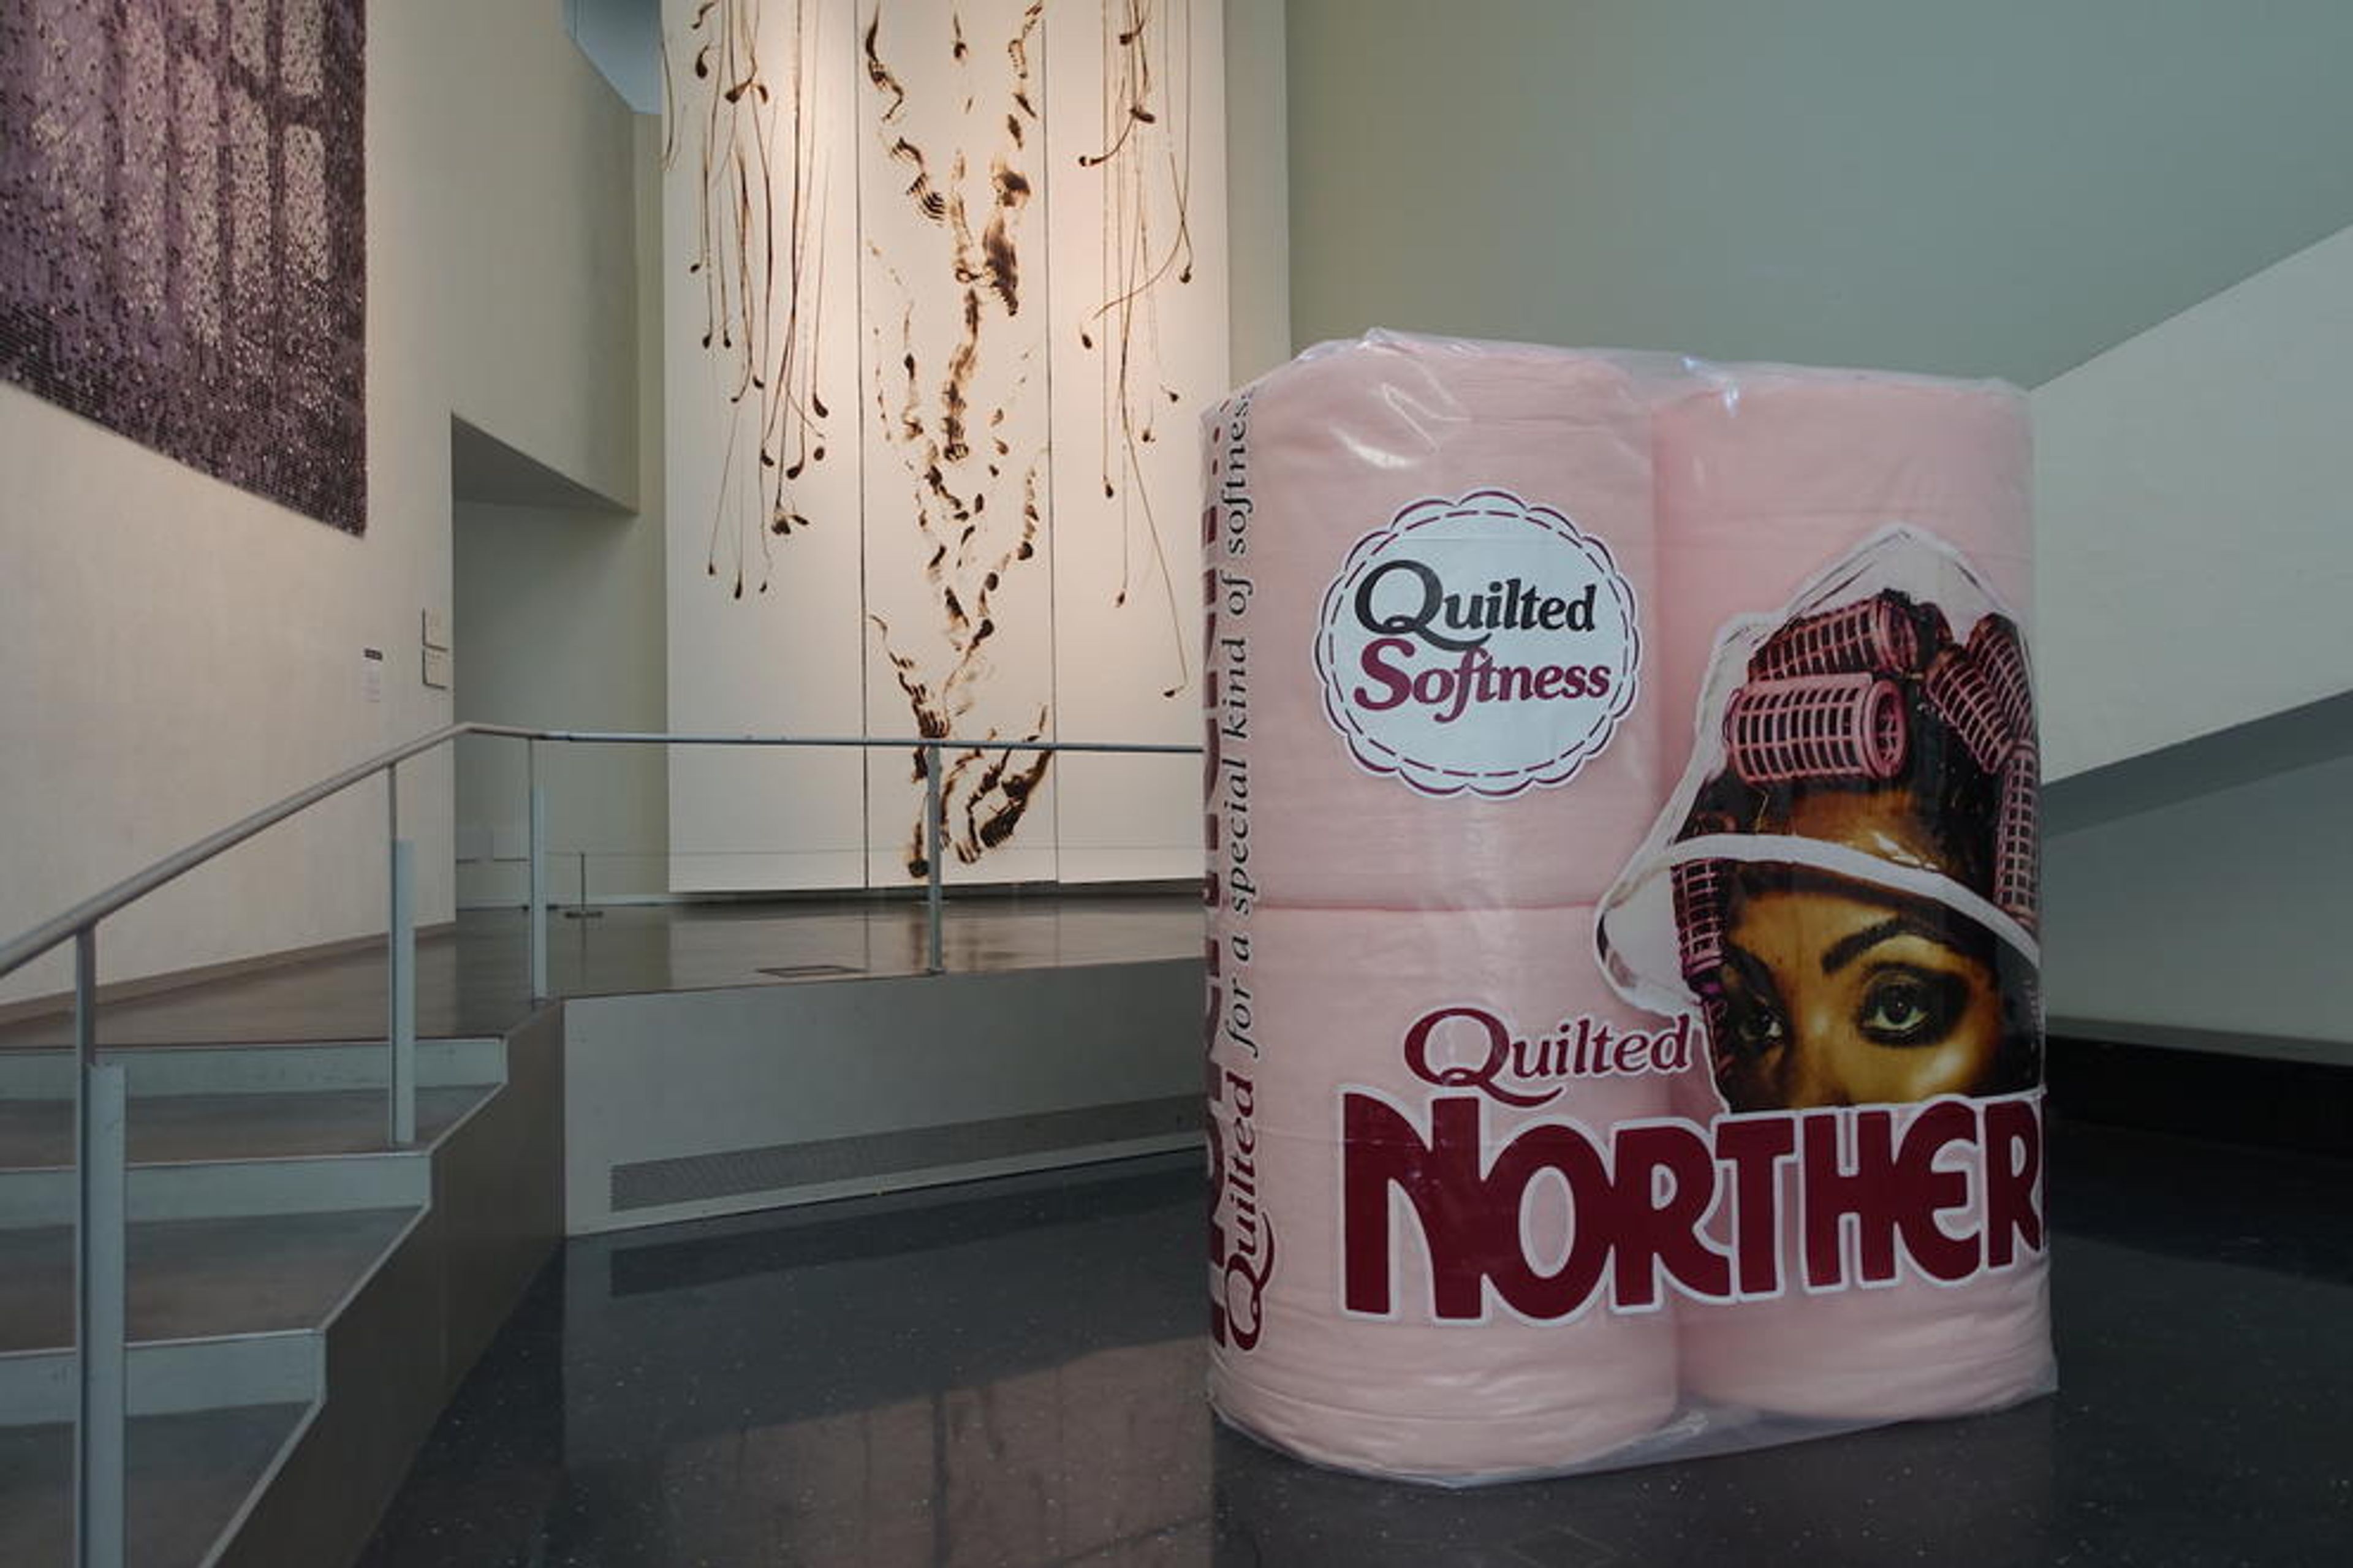 extra large version of four pink toilet rolls called "Quilted Northern" 